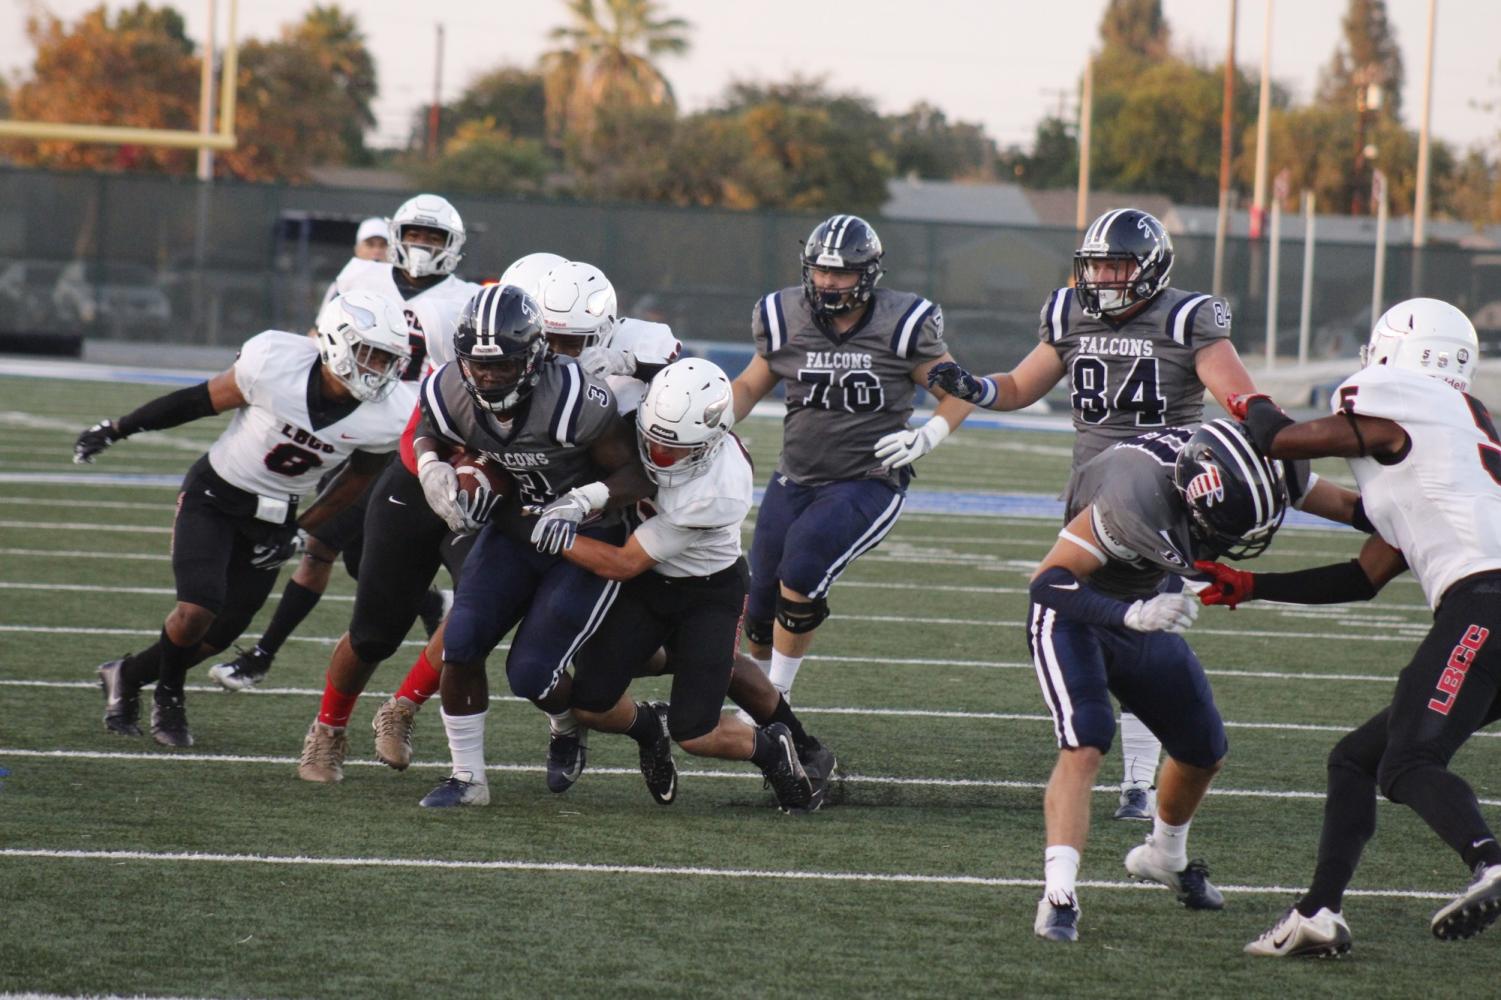 Sophomore running back No. 3 Rhamondre Stevenson carrying the defensive line on his back and pushing through to gain yardage. Stevenson set the Falcons school record in single-game rushing yards with 339 in the game at Cerritos College against Long Beach City College on Sept. 29, 2018.